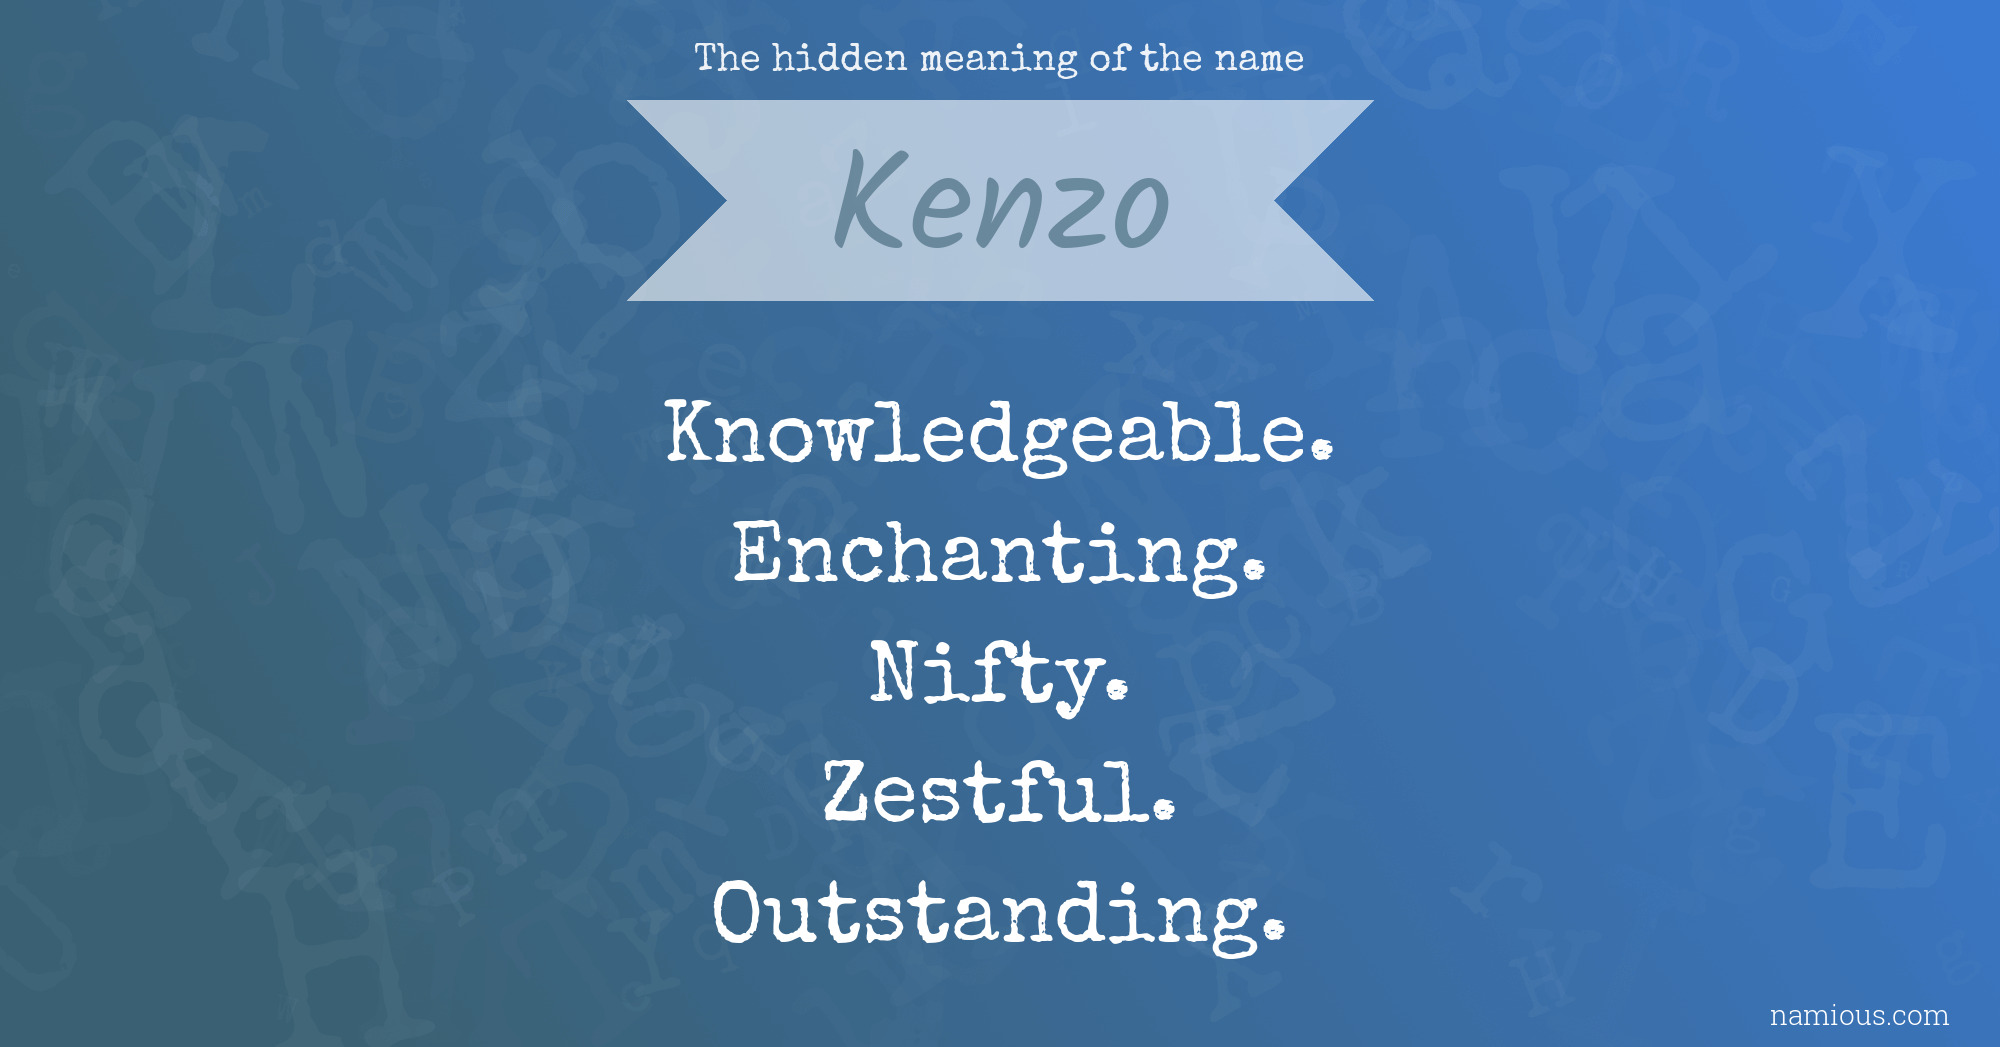 hidden meaning of the name Kenzo | Namious